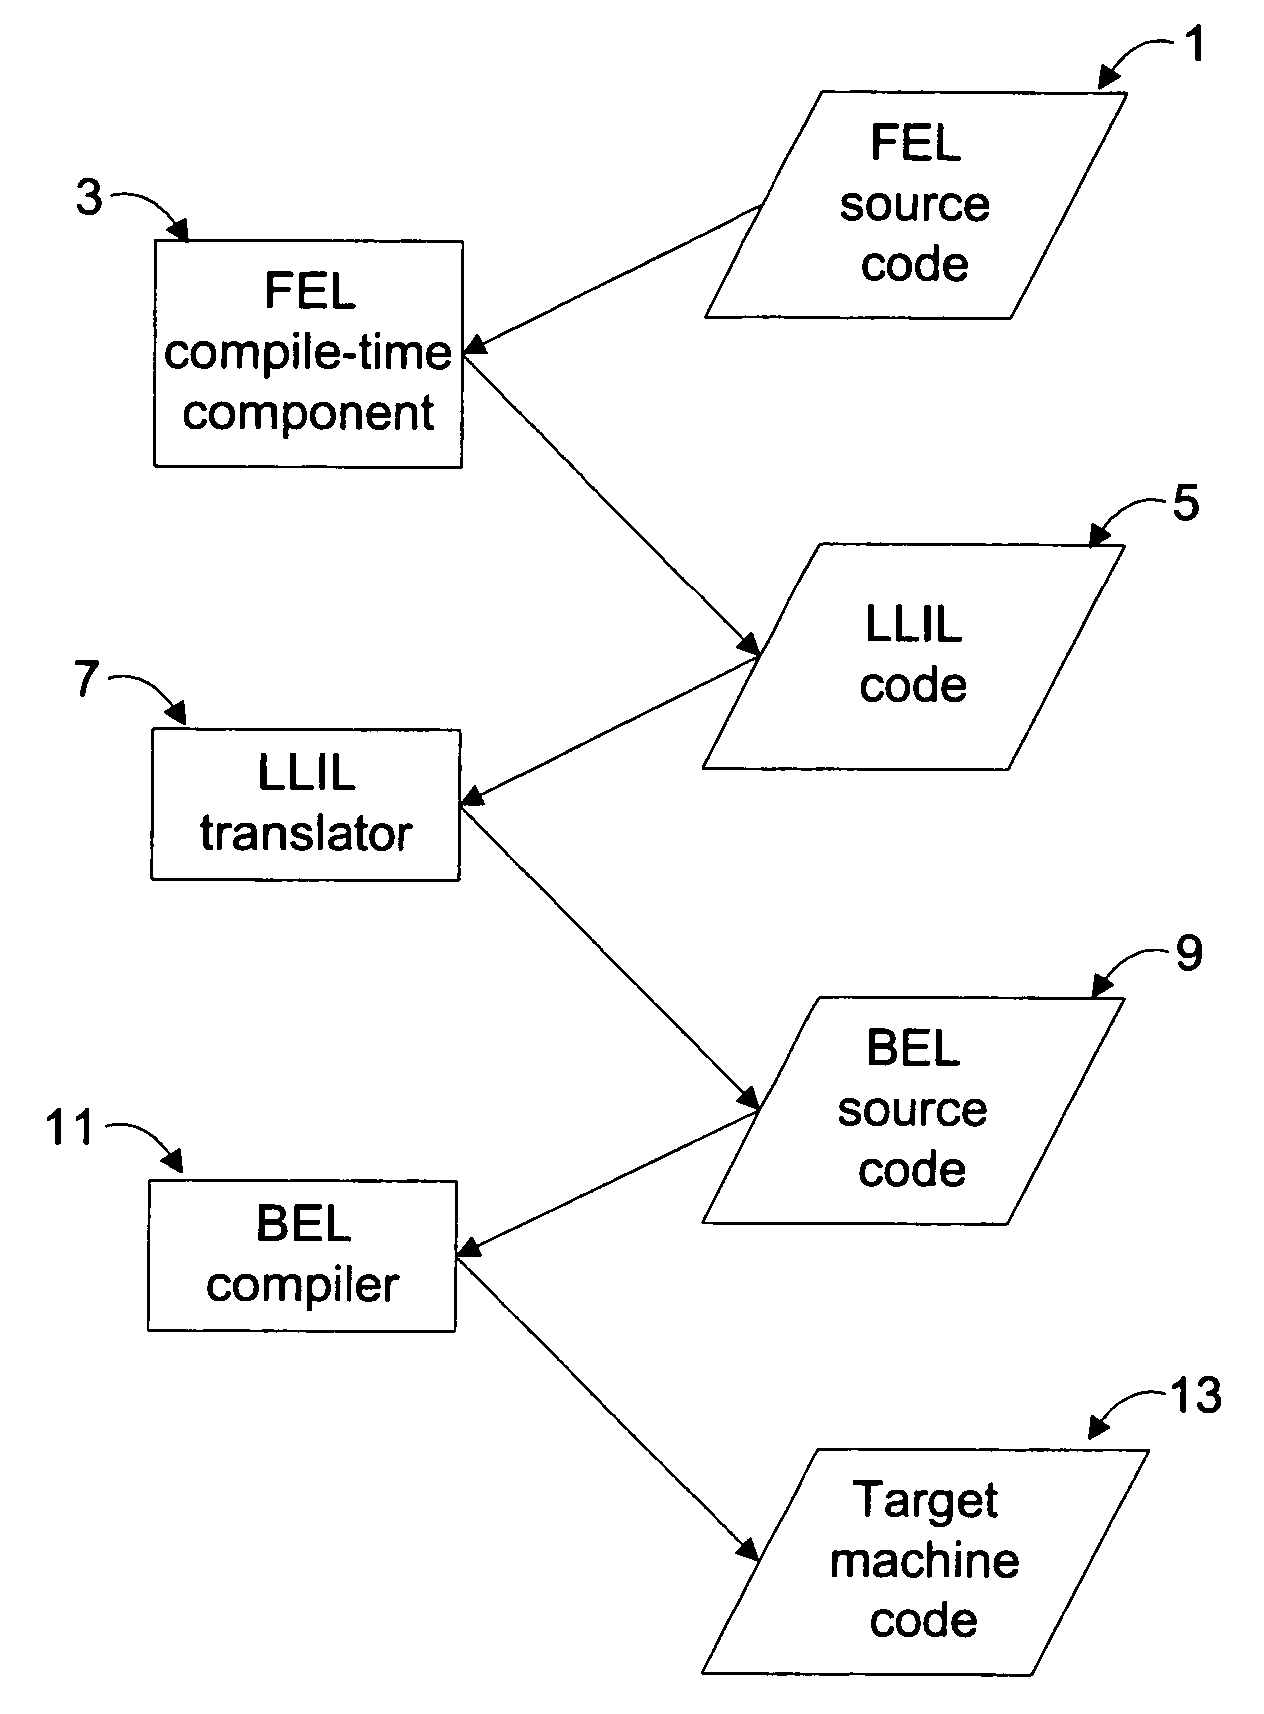 Methods for hosting general purpose computer languages on speical purpose systems